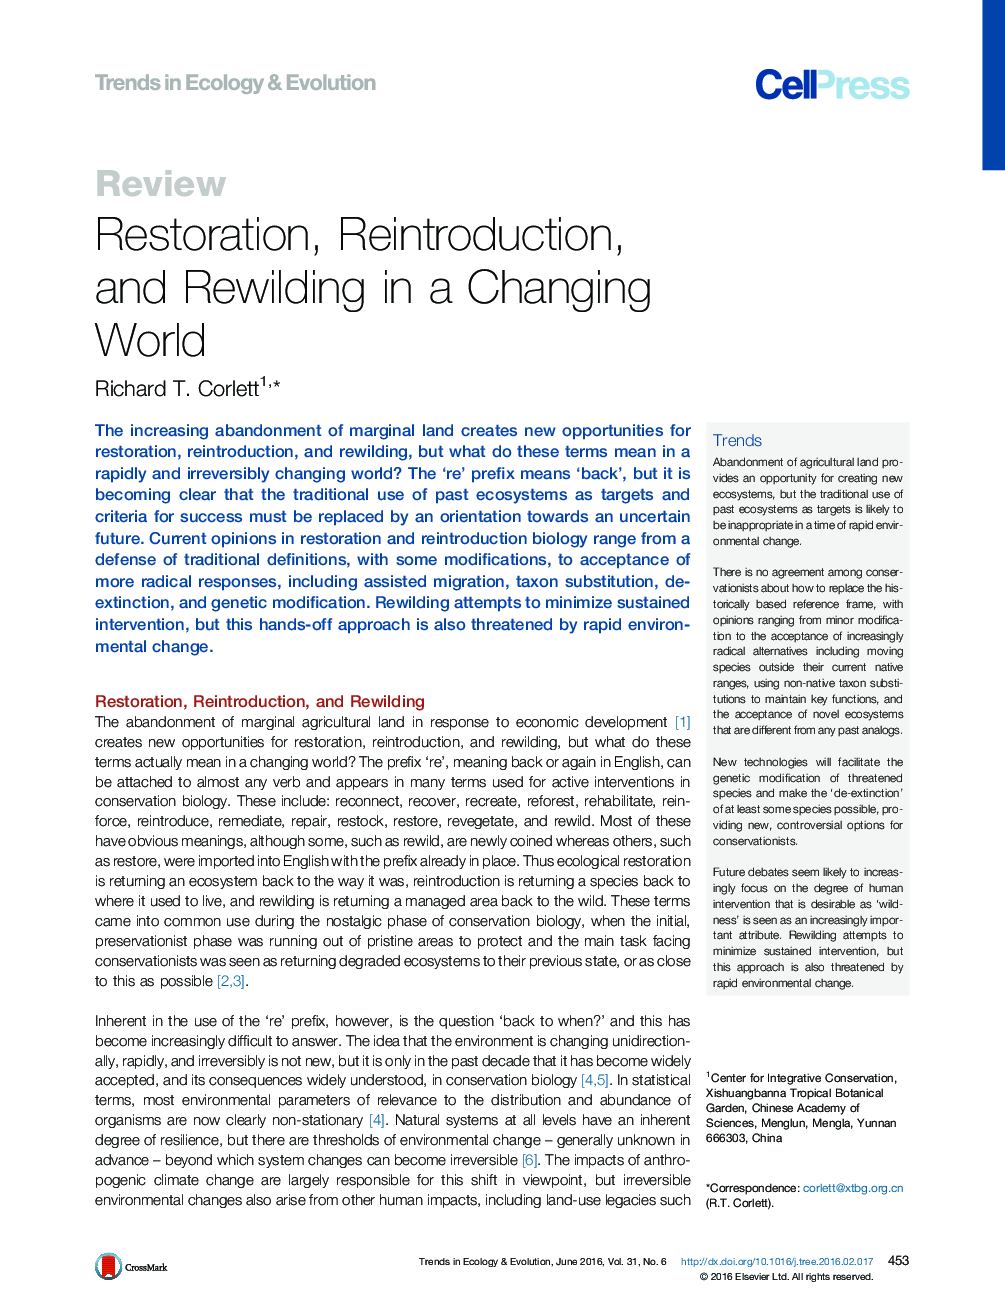 Restoration, Reintroduction, and Rewilding in a Changing World